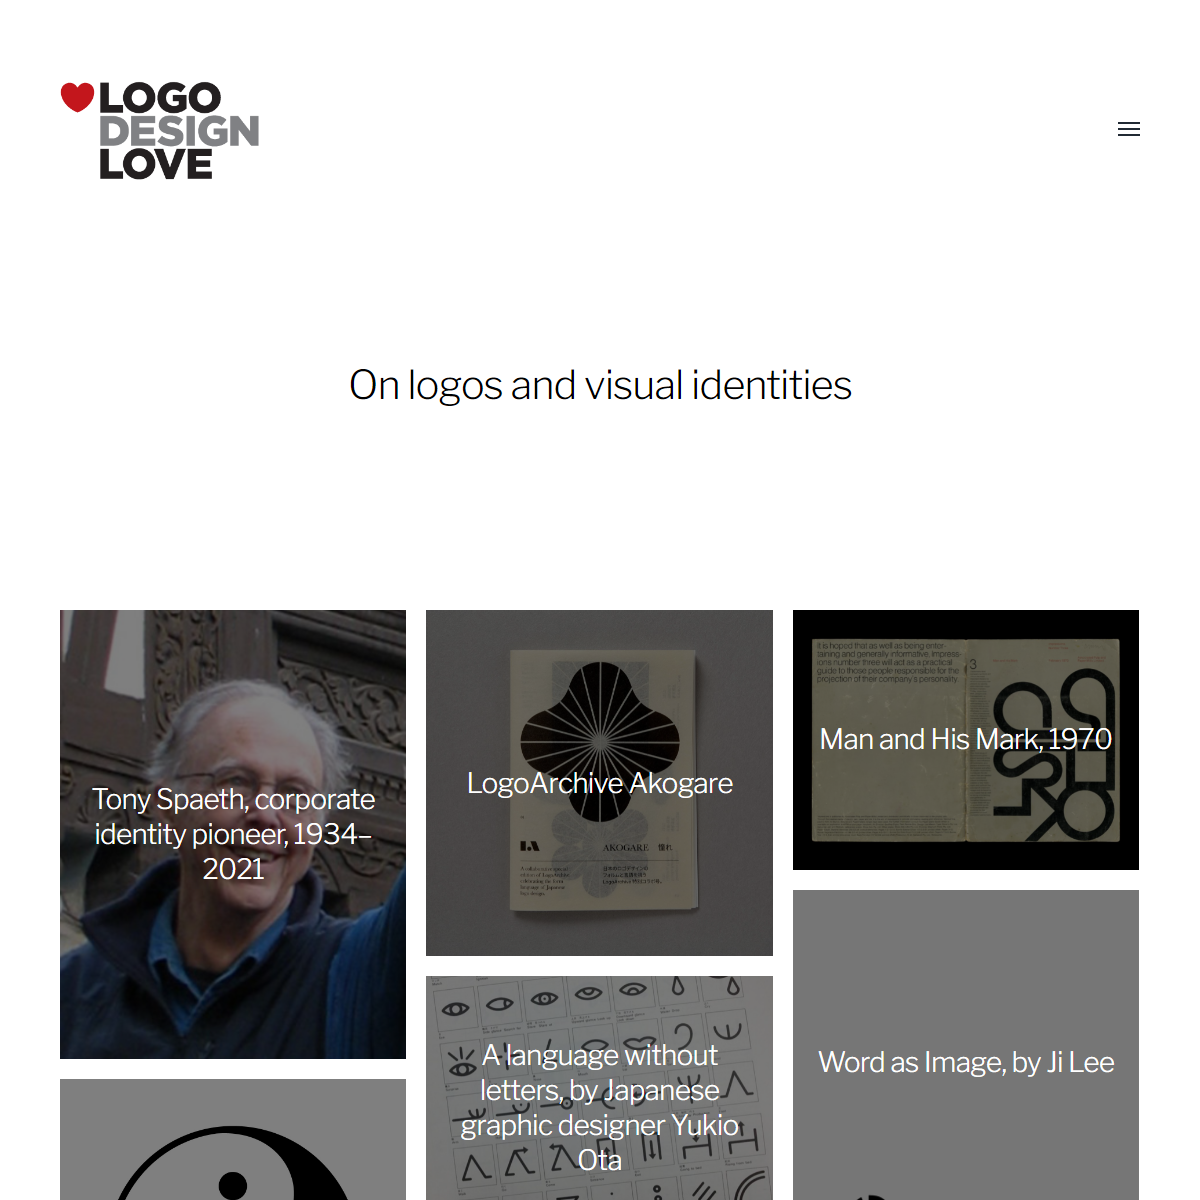 A complete backup of https://www.logodesignlove.com/